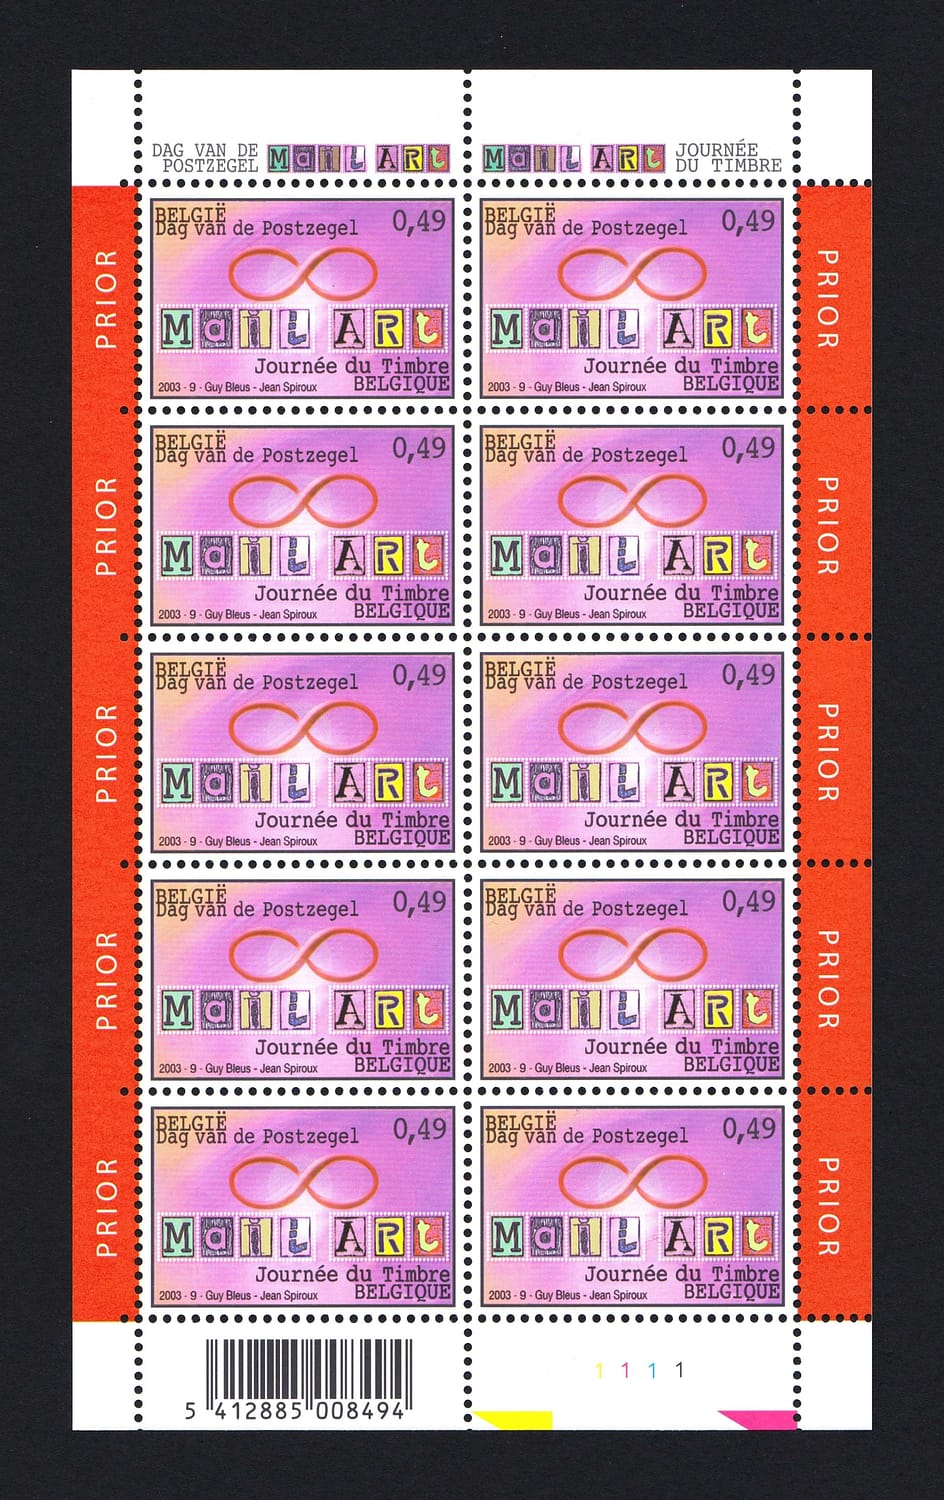 Mail Art Stamps by Guy Bleus Jean Spiroux 2003